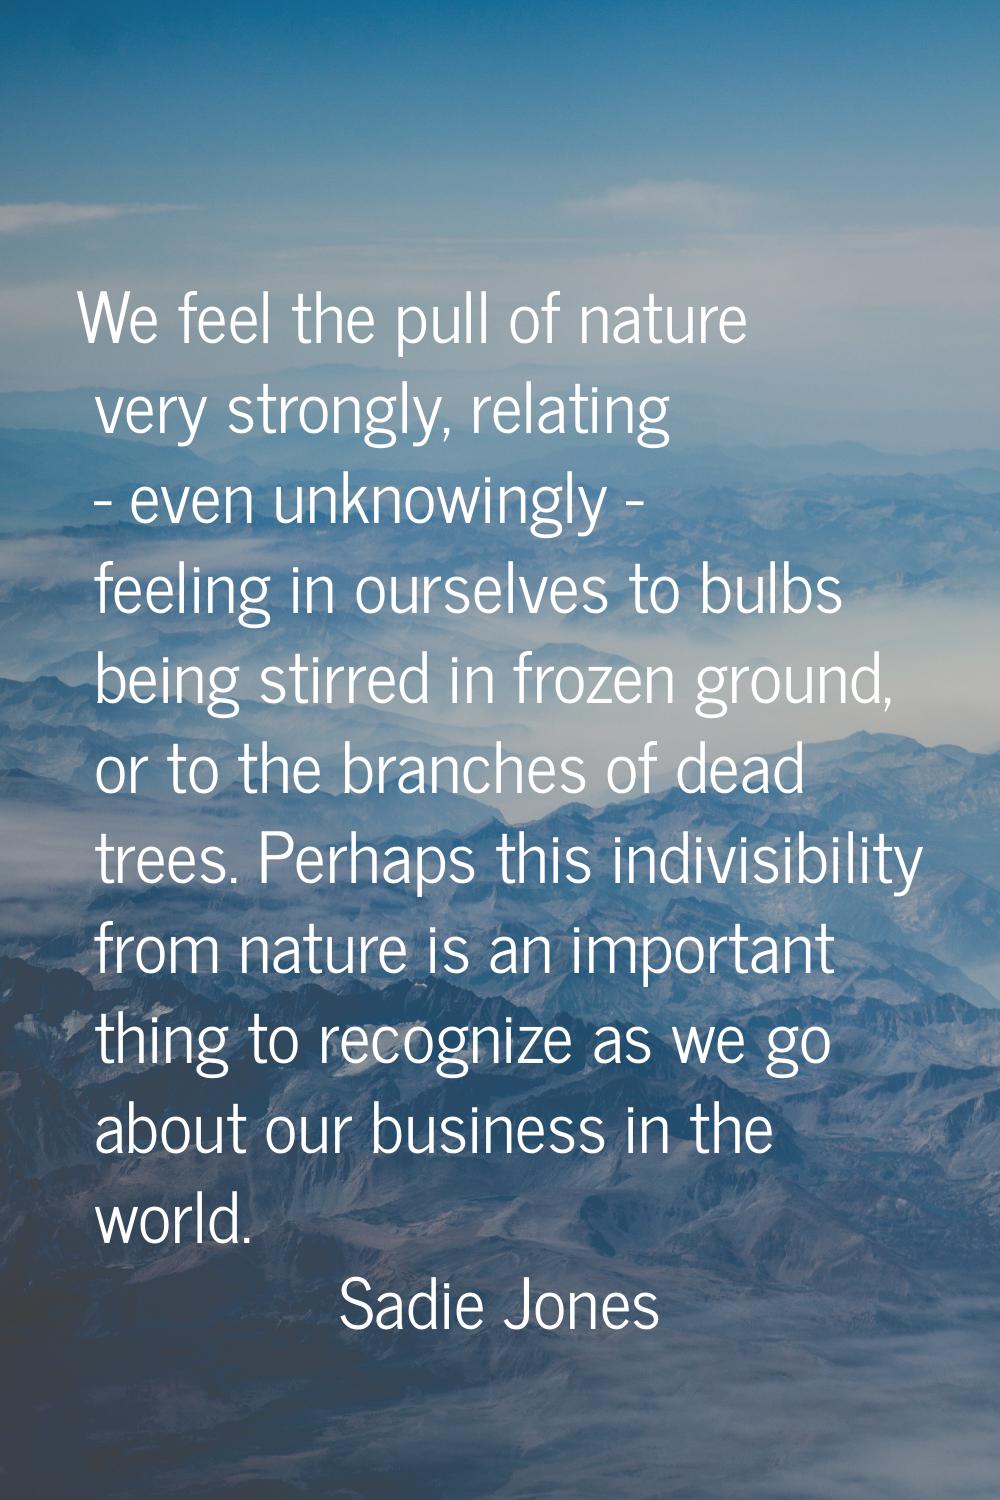 We feel the pull of nature very strongly, relating - even unknowingly - feeling in ourselves to bul